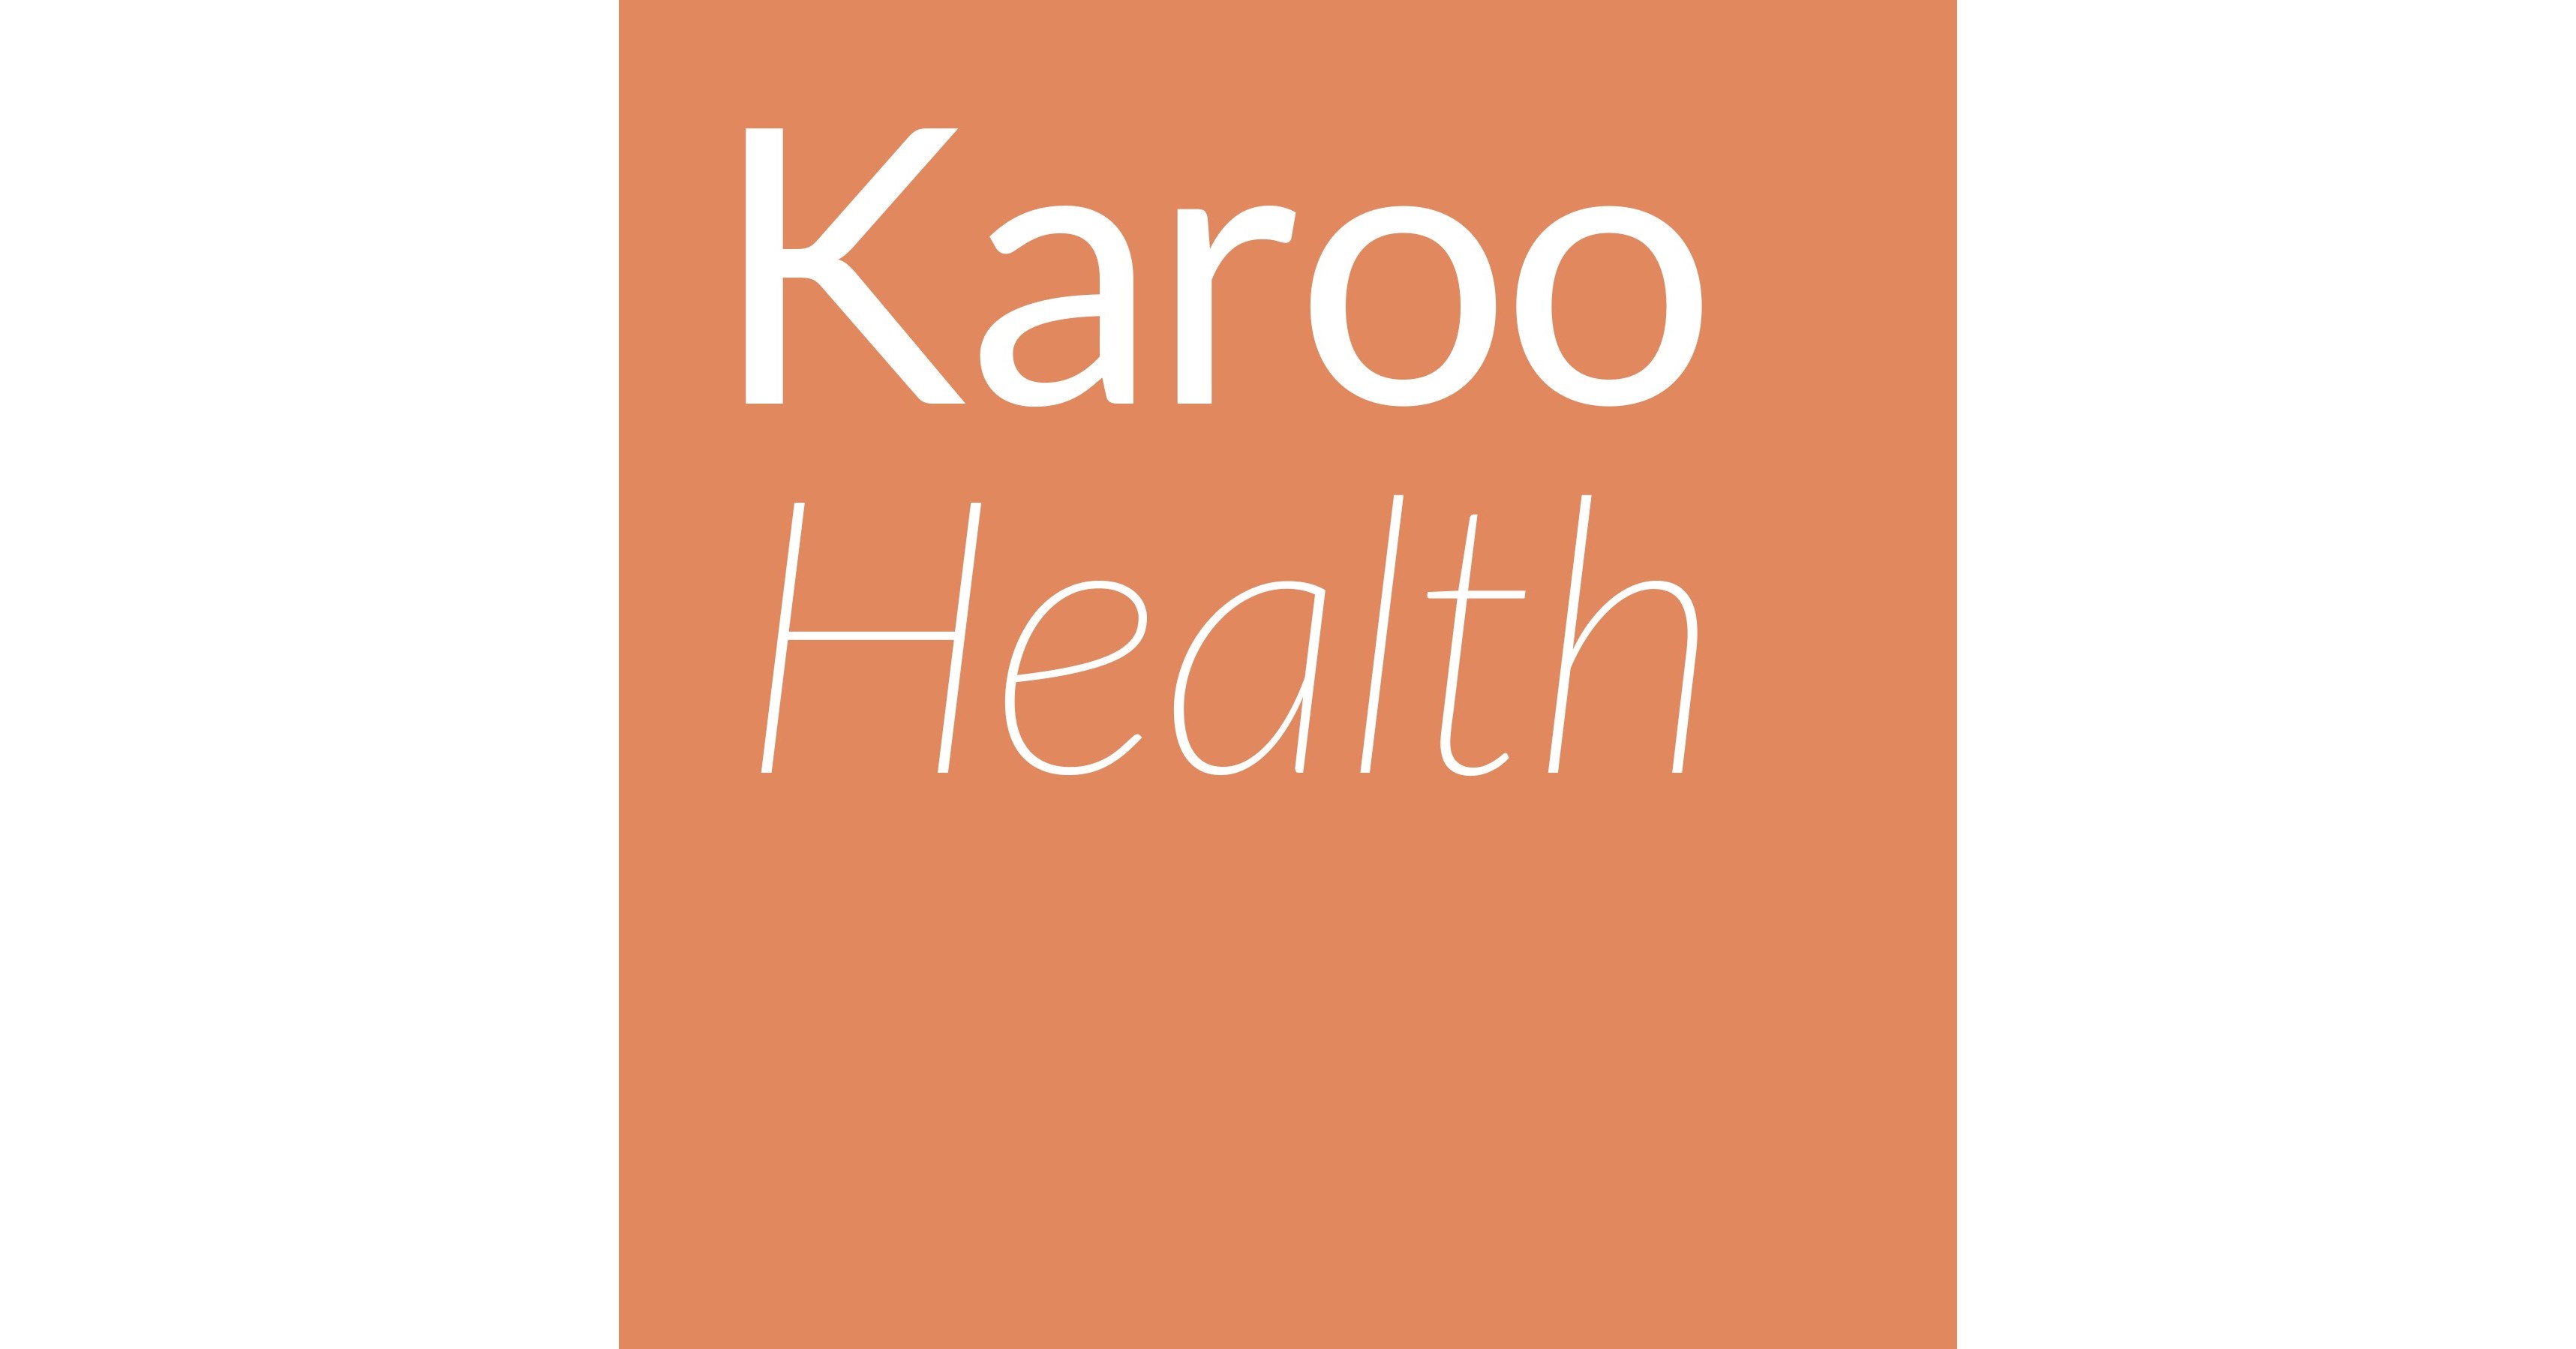 Karoo Health Receives Seed Funding from Panoramic Ventures and FirstMile  Ventures to Reimagine Cardiovascular Care